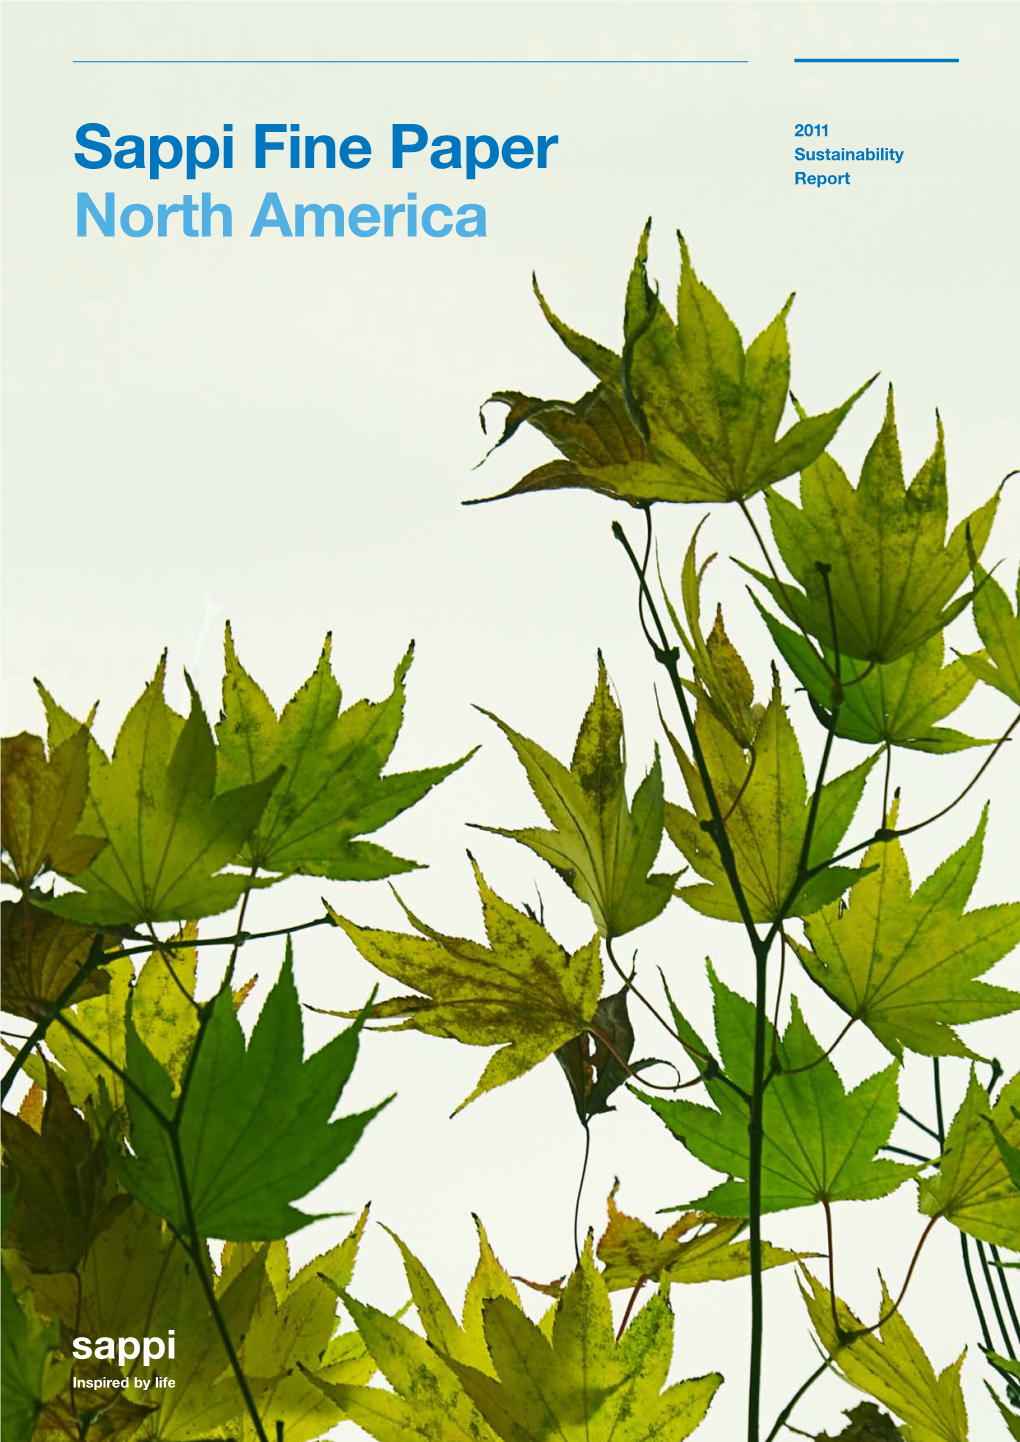 Sappi Fine Paper North America Overview 08 Corporate Governance 12 Five-Year Goals 17 Key Environmental Issues 25 Social Responsibility 35 Key Performance Indicators